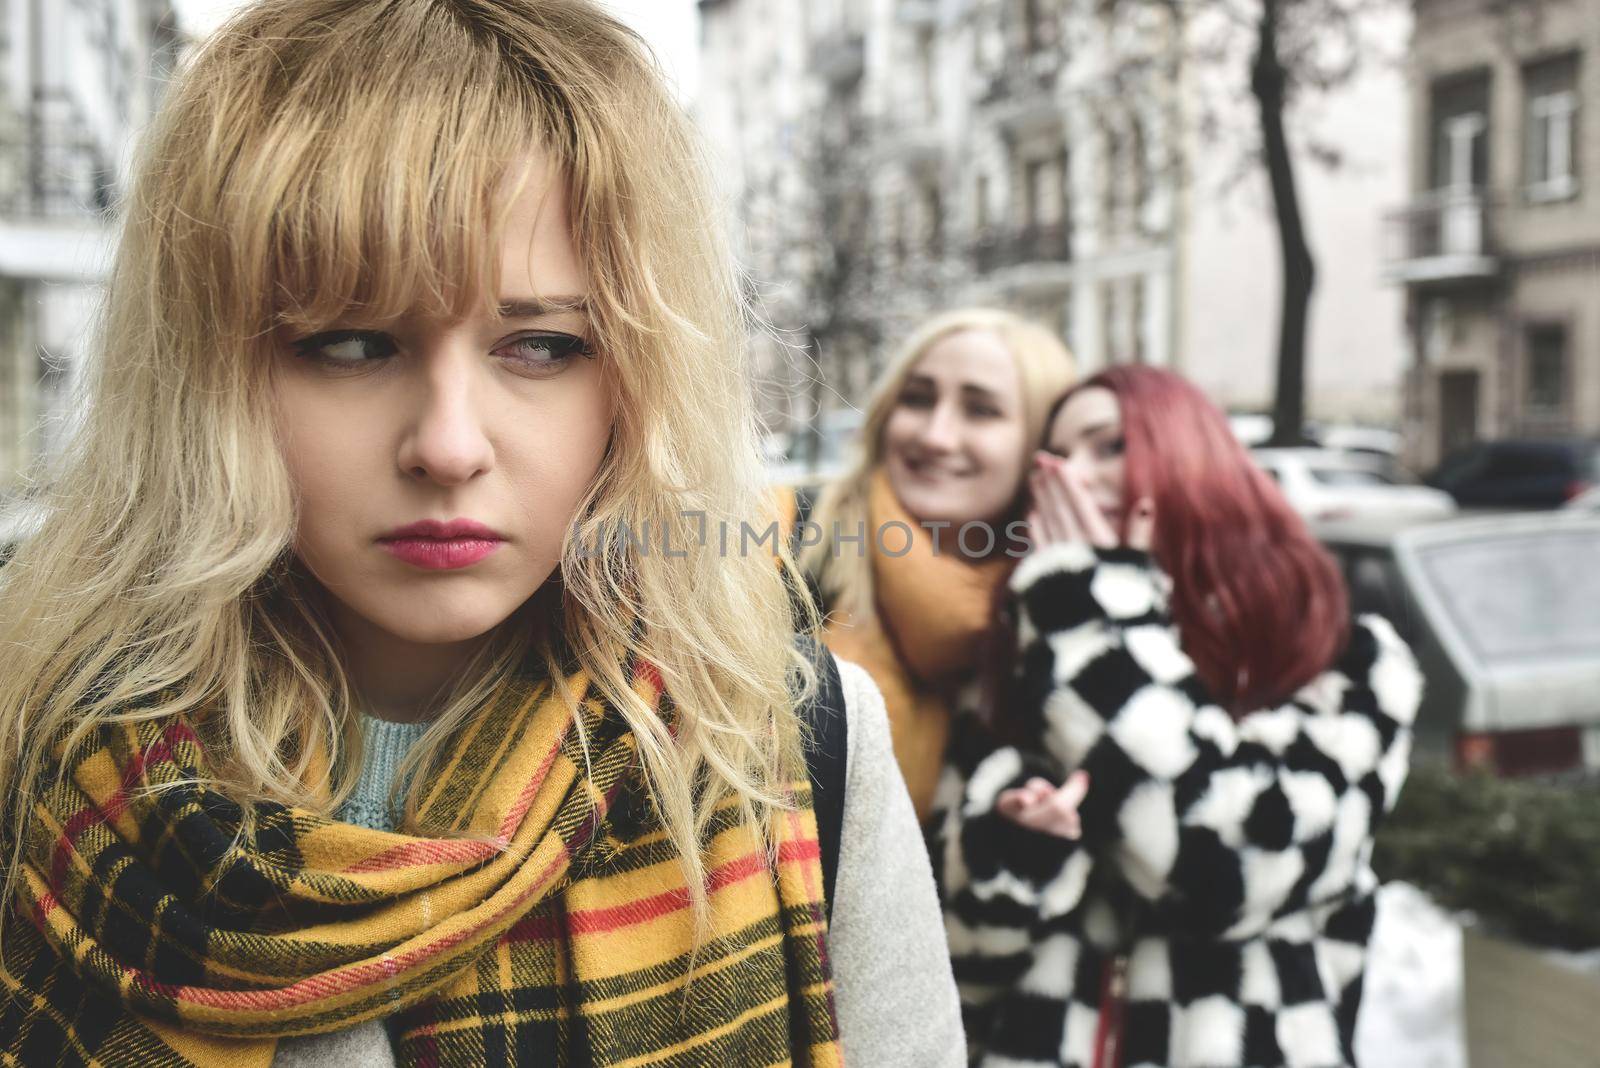 a young depressed student girl with blonde hair who is bullied by her teenage peers, disturbed by feelings of despair and suffering from oppression. social problems